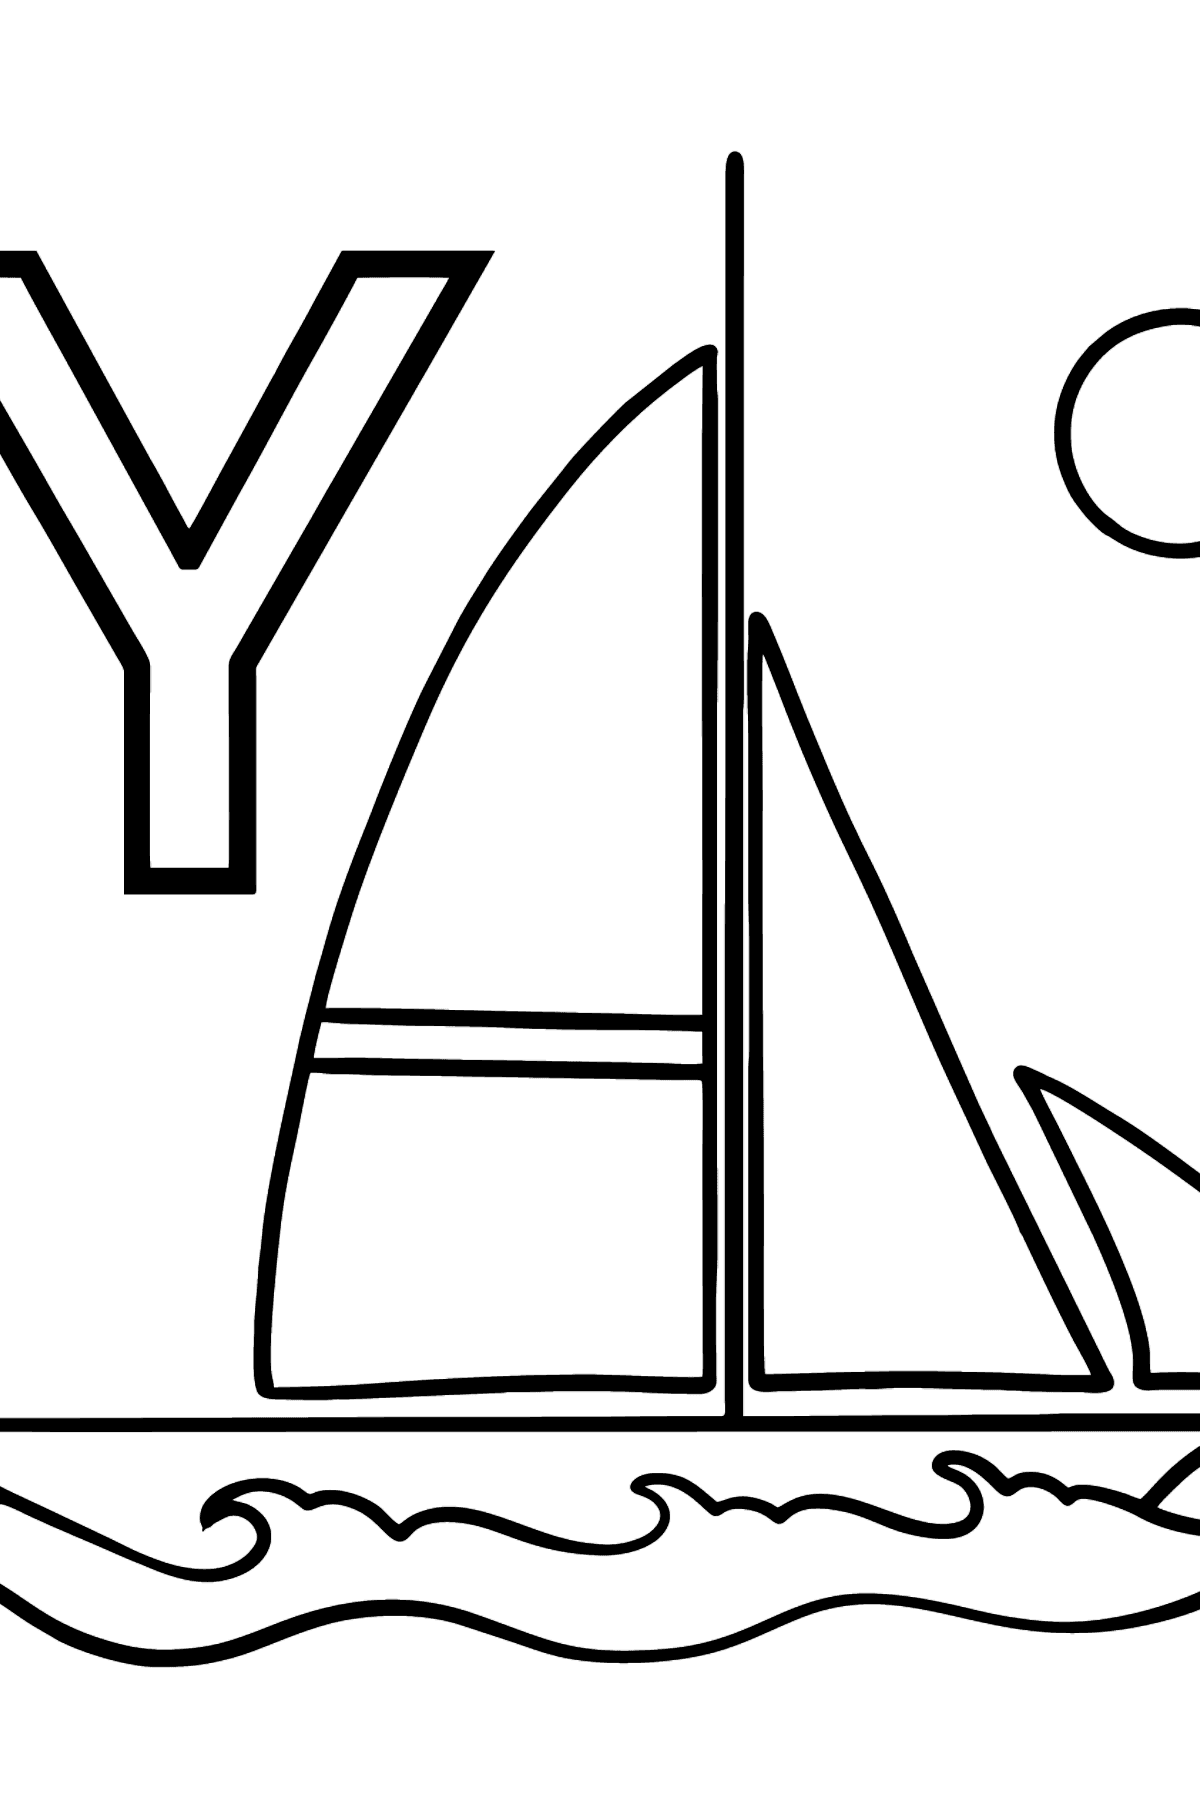 English Letter Y coloring pages - YACHT - Coloring Pages for Kids